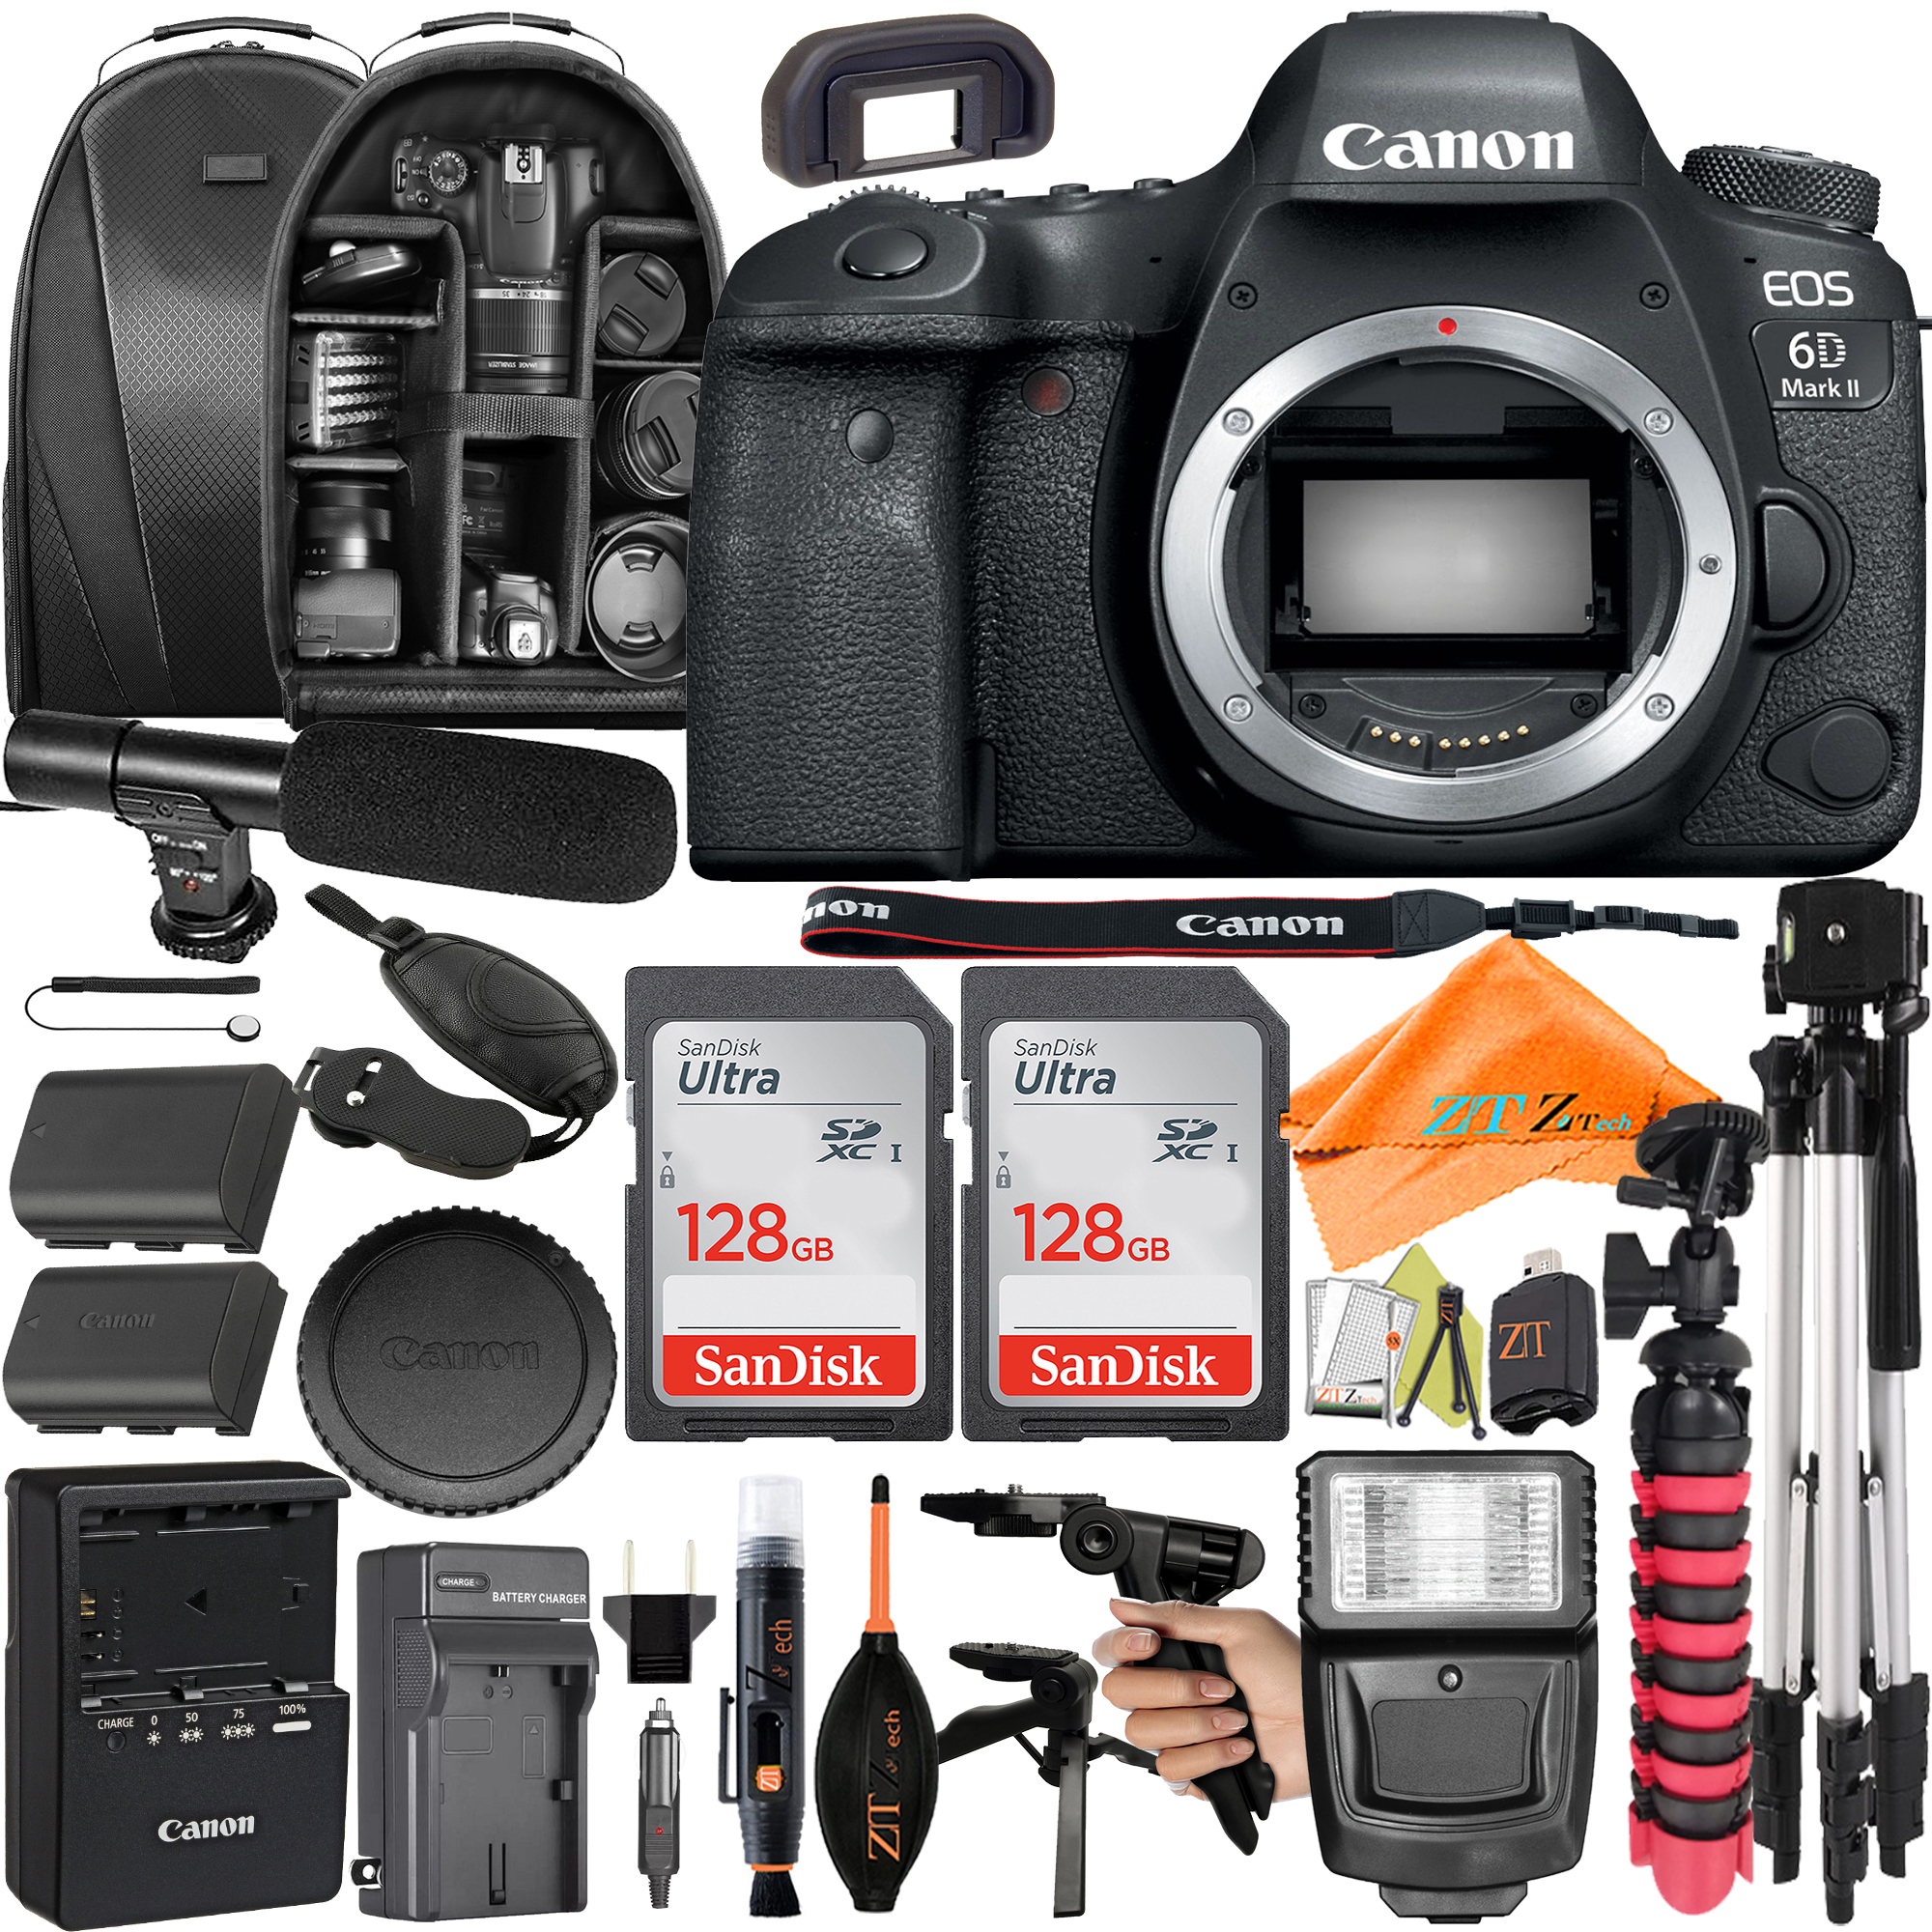 Canon EOS 6D Mark II DSLR Camera (Body Only) with SanDisk 128GB + Backpack Case + Microphone + ZeeTech Accessory Bundle